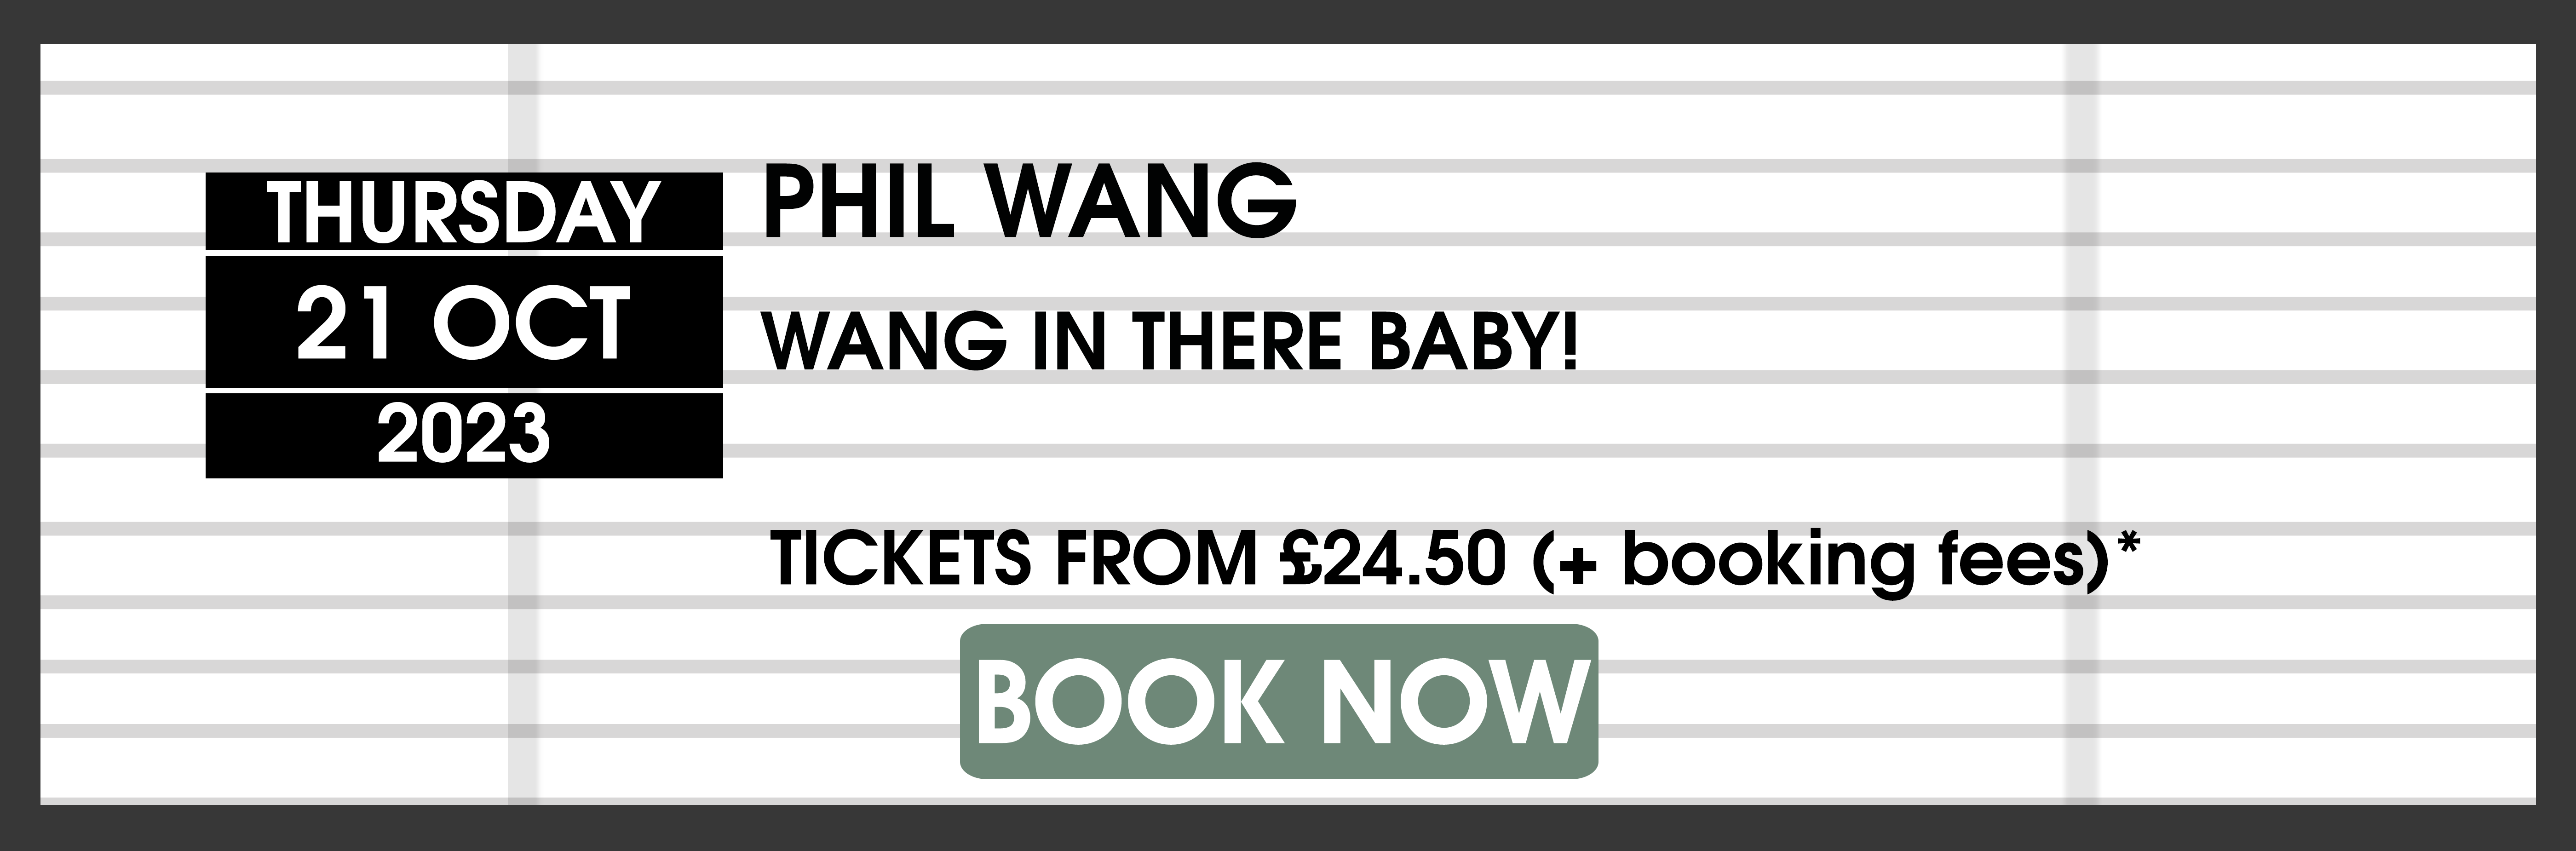 23.10.21 Phil Wang BOOKNOW